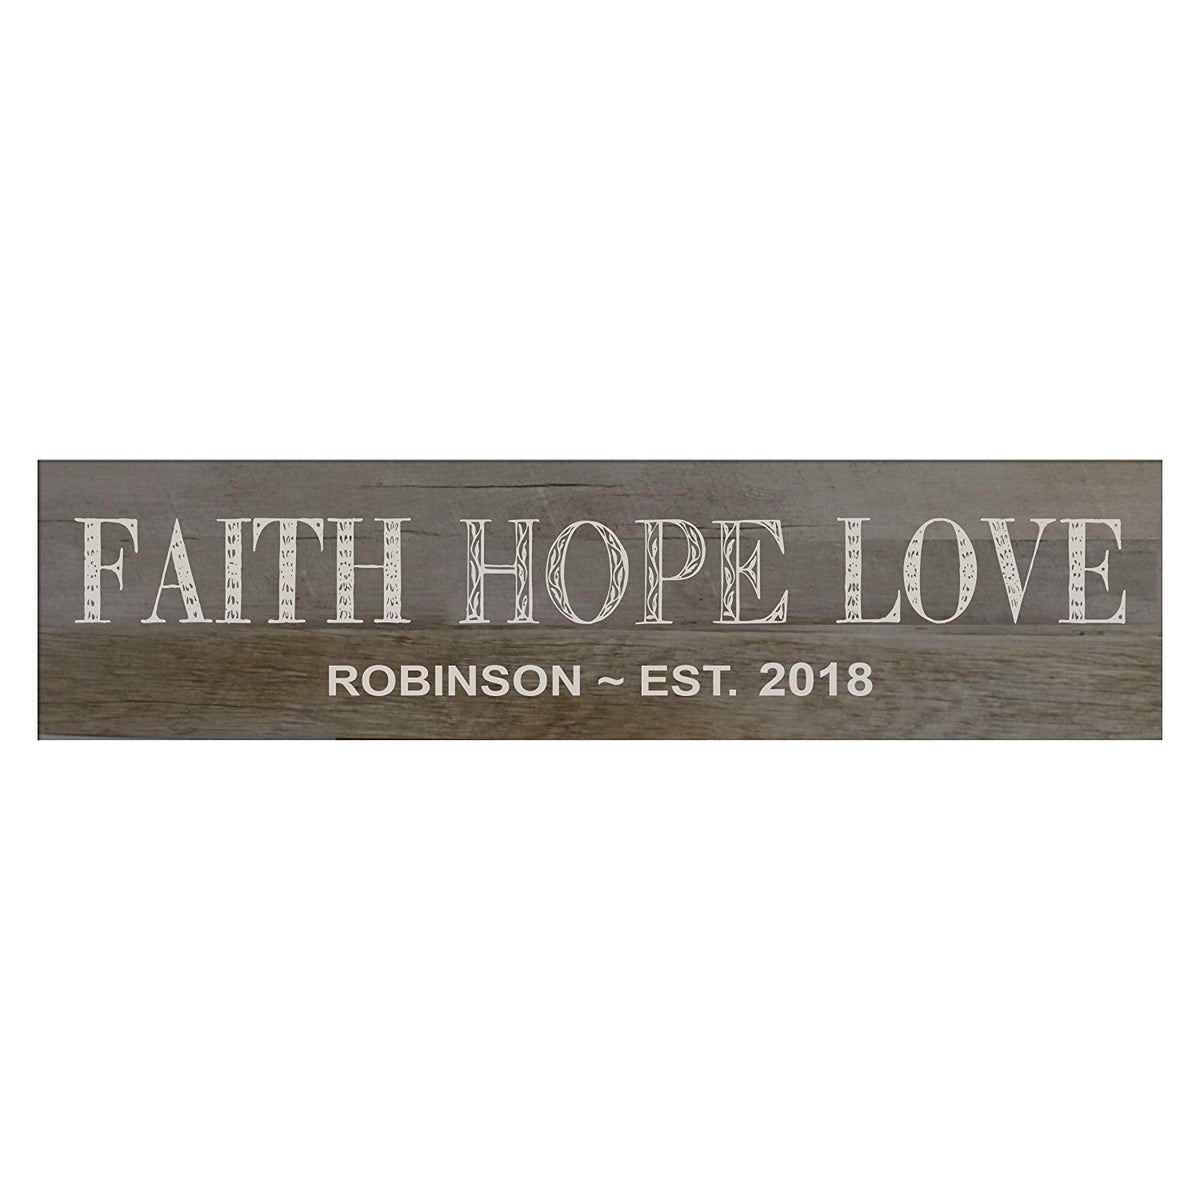 Faith Hope Love Wooden Wall Sign Art Size 10 x 40 - LifeSong Milestones